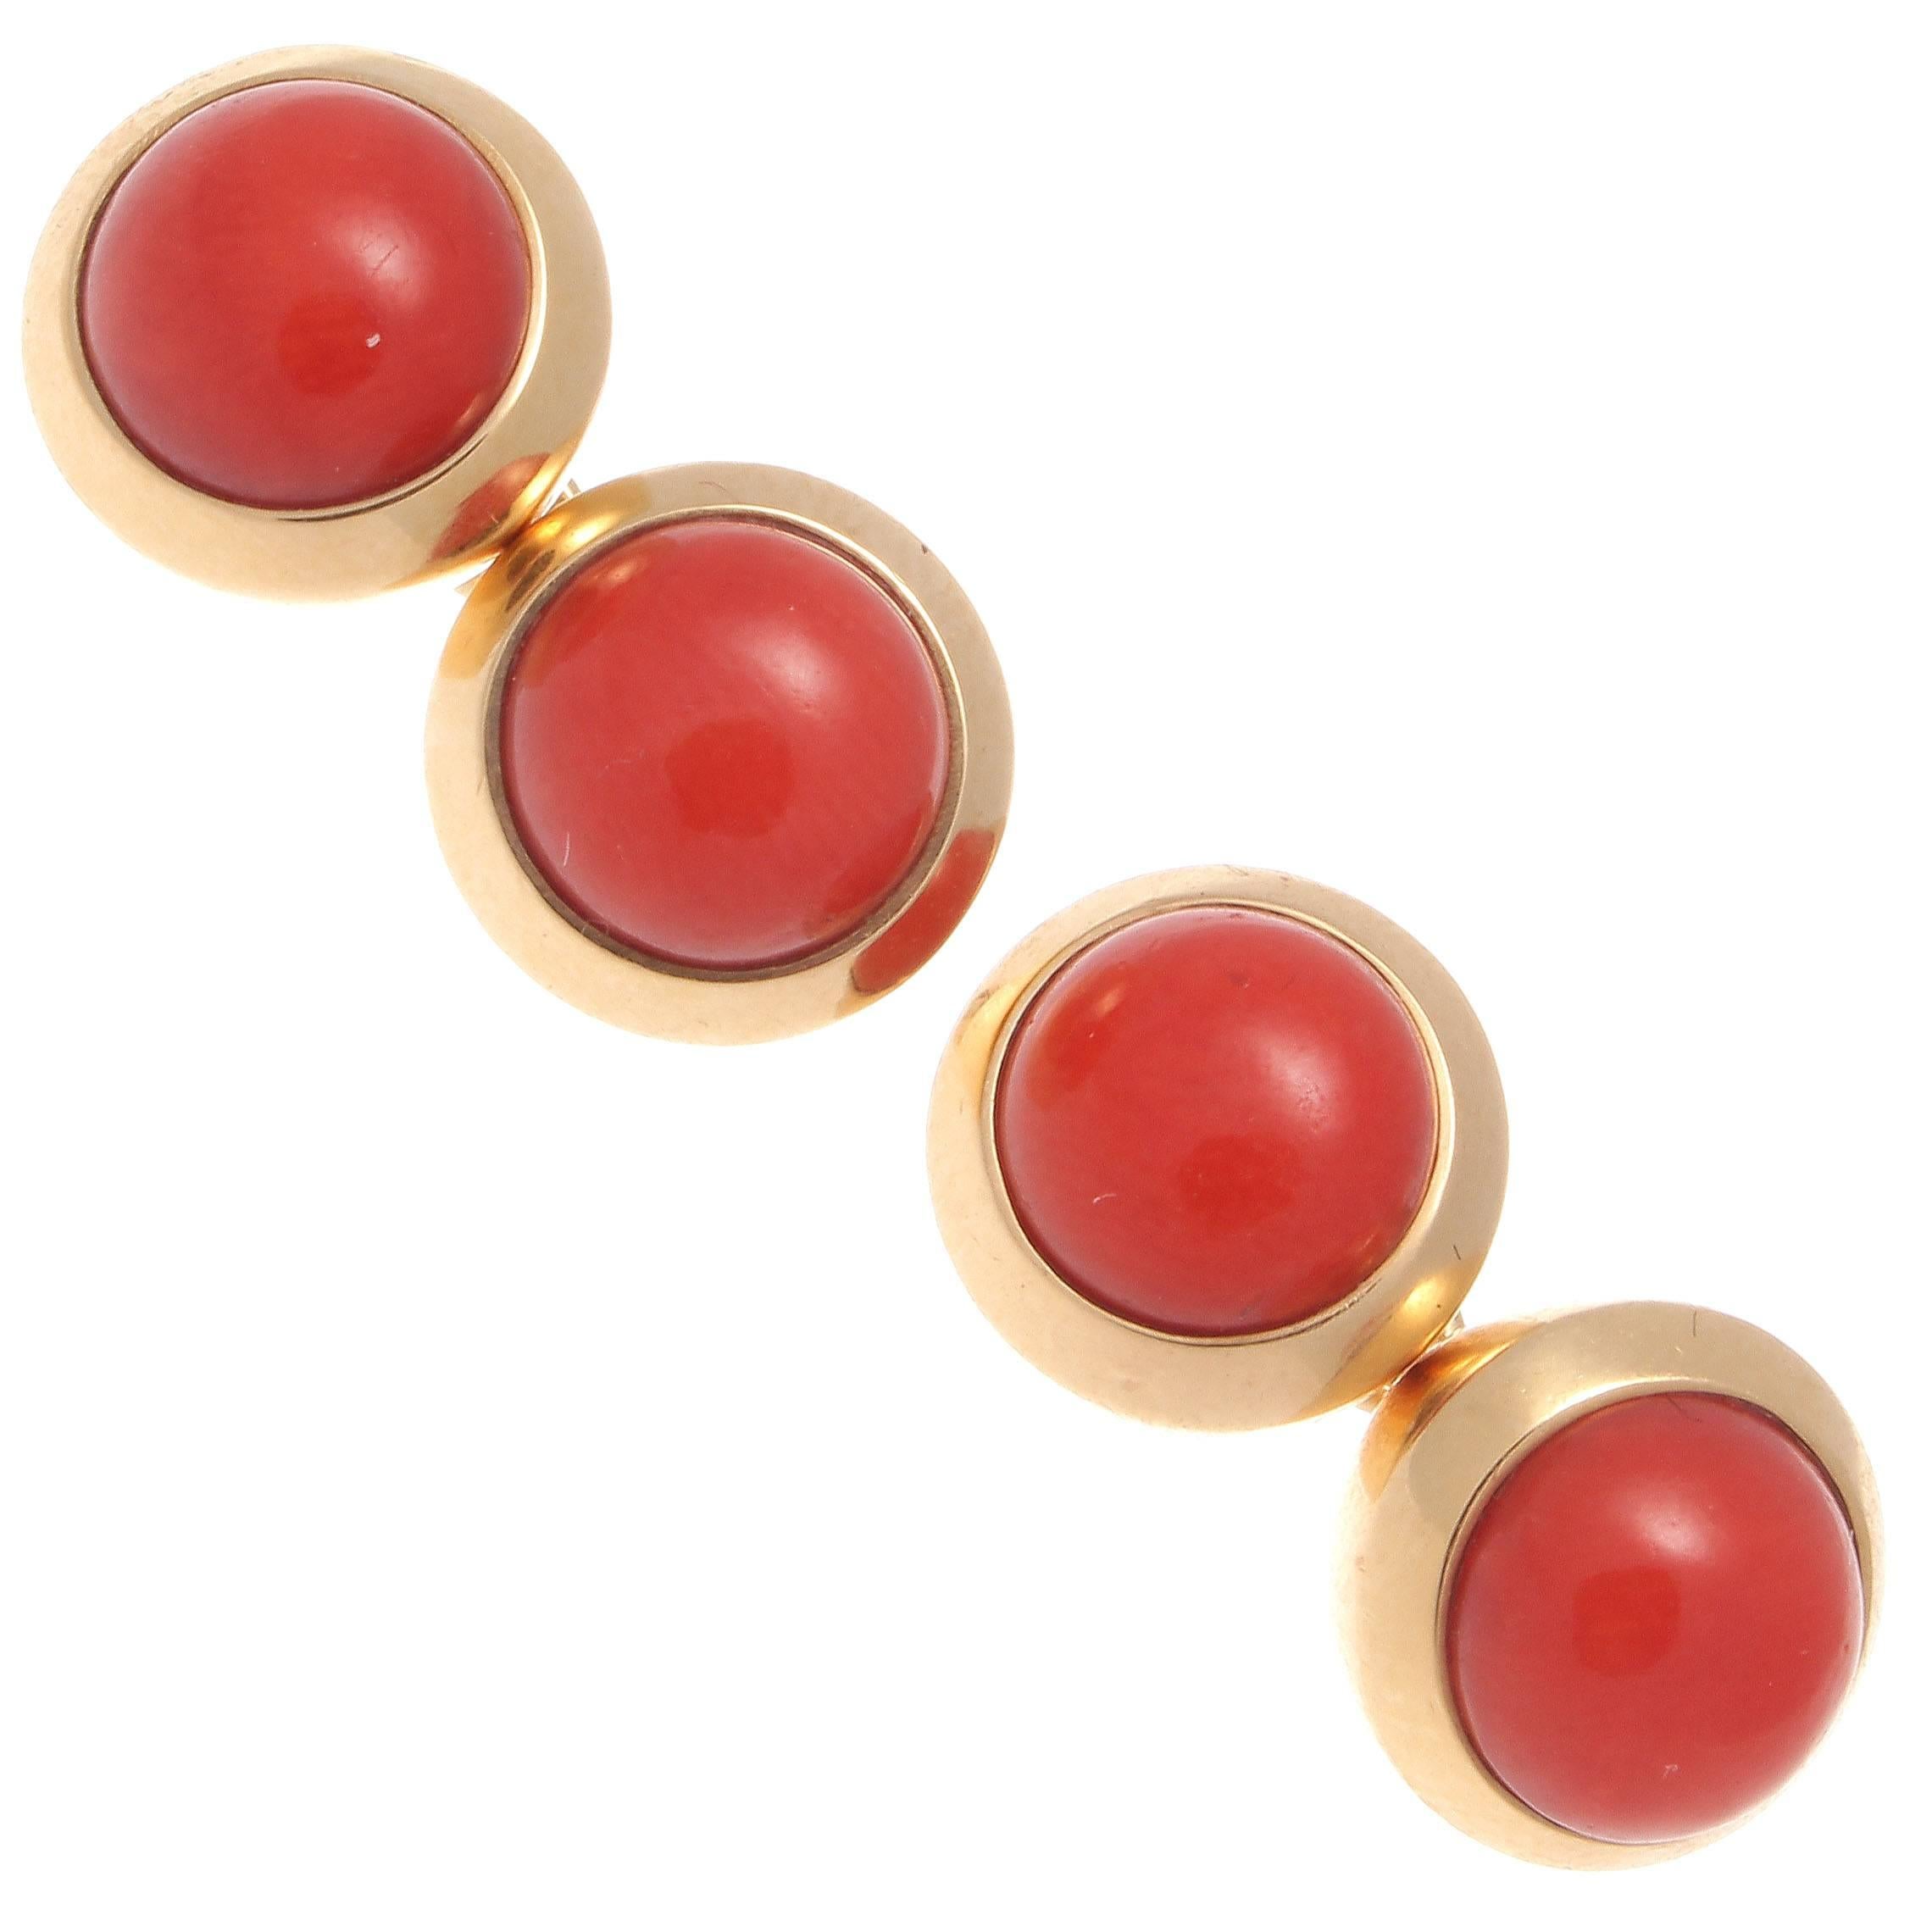 Elegance and pure design is innate in all of Cartier's creations. Featuring bright cabochon cut reddish orange coral bezel set in 18k glistening yellow gold balls. Signed Cartier.